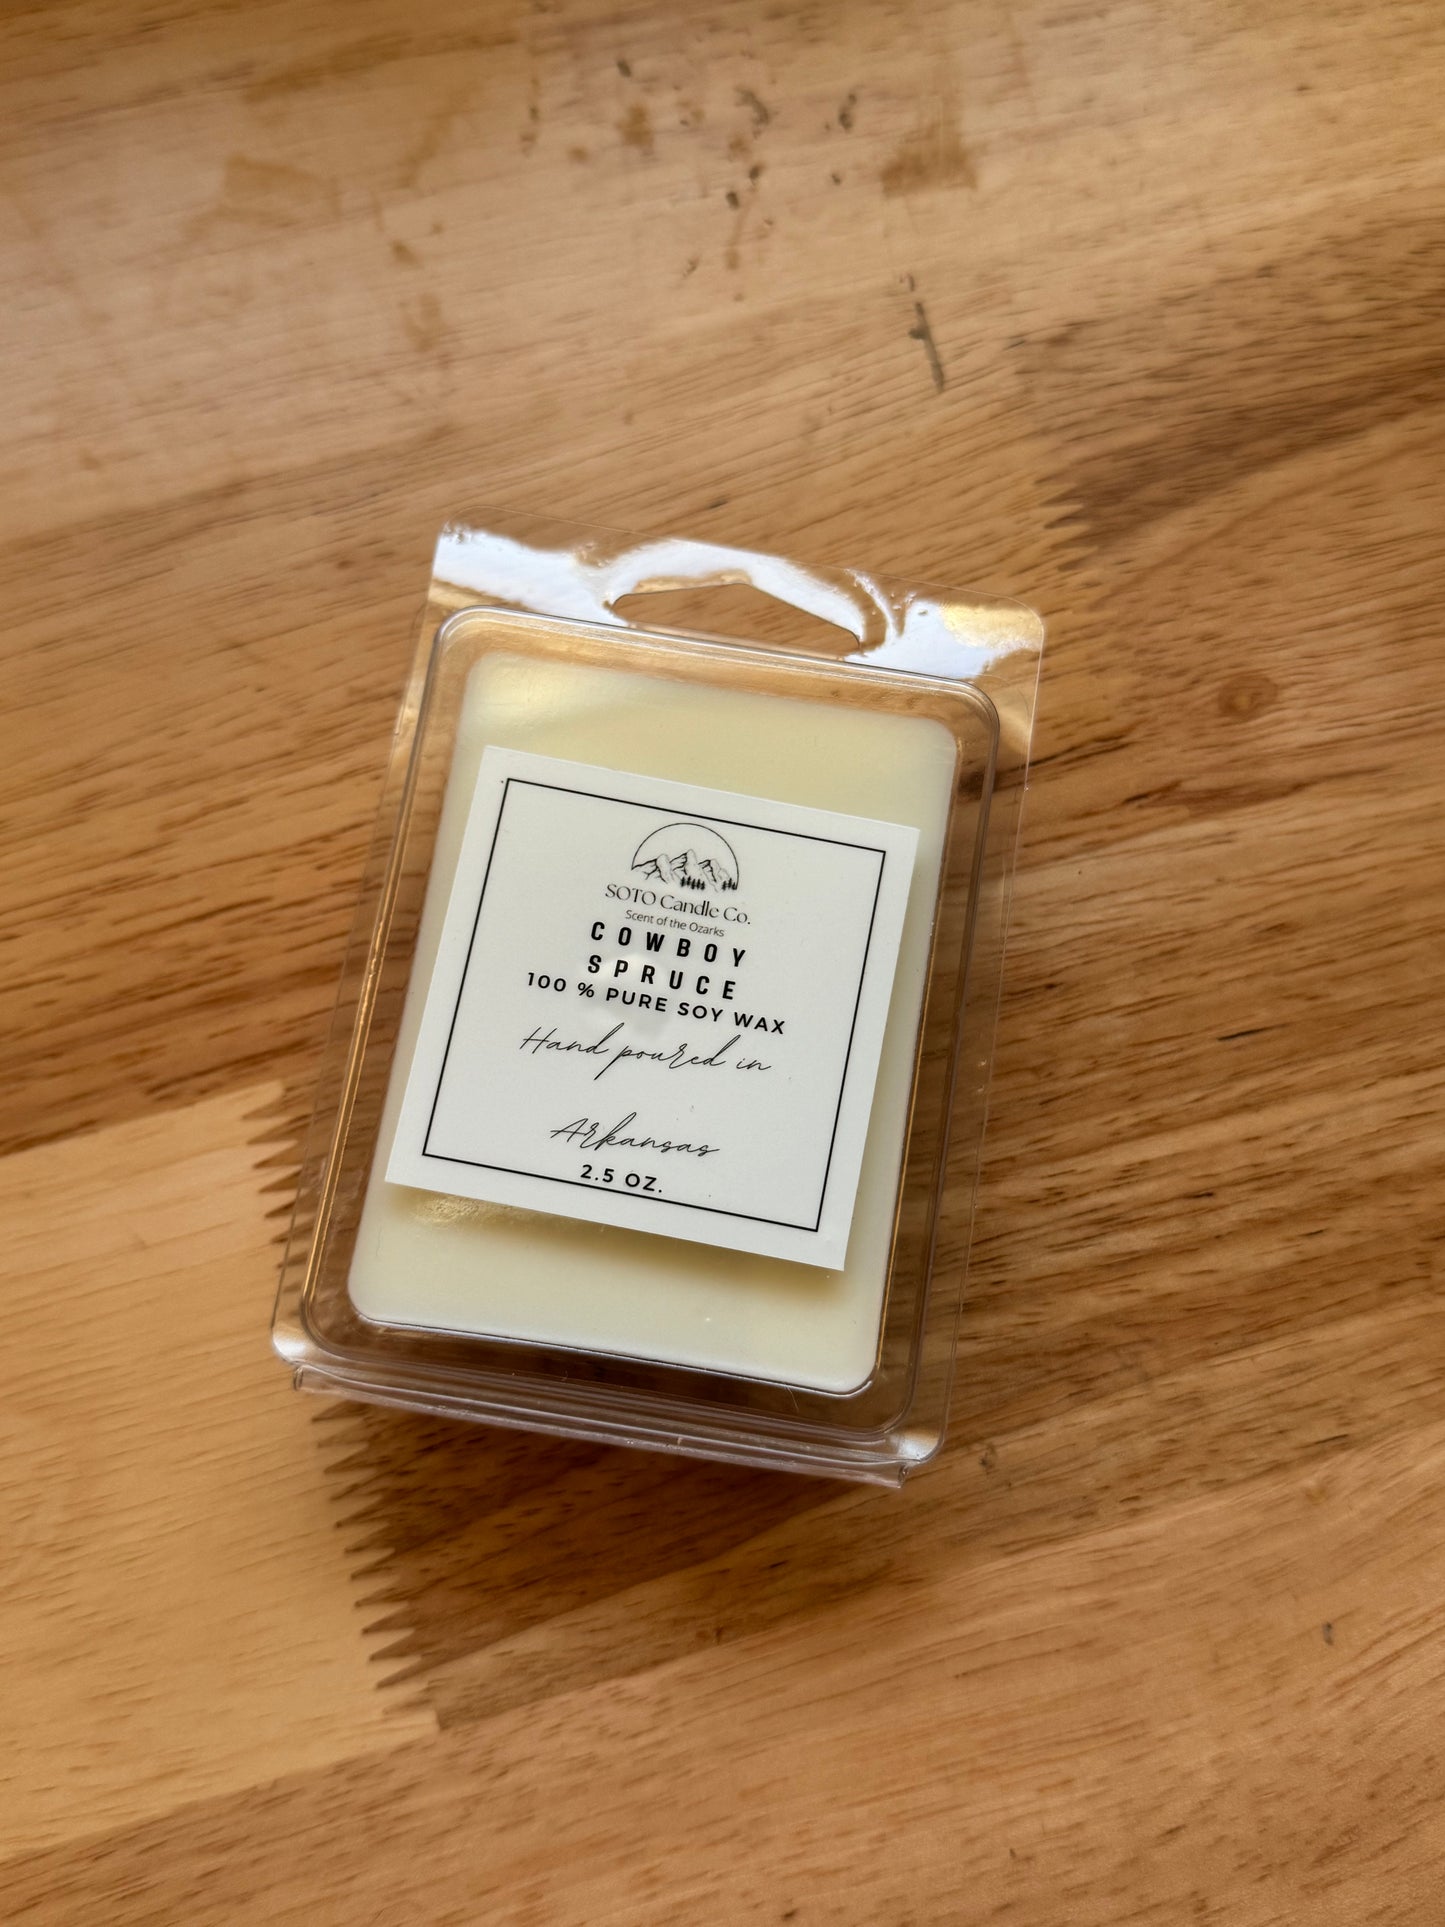 SOTO Candle Co Pure Soy Wax Melts All natural and Non Toxic